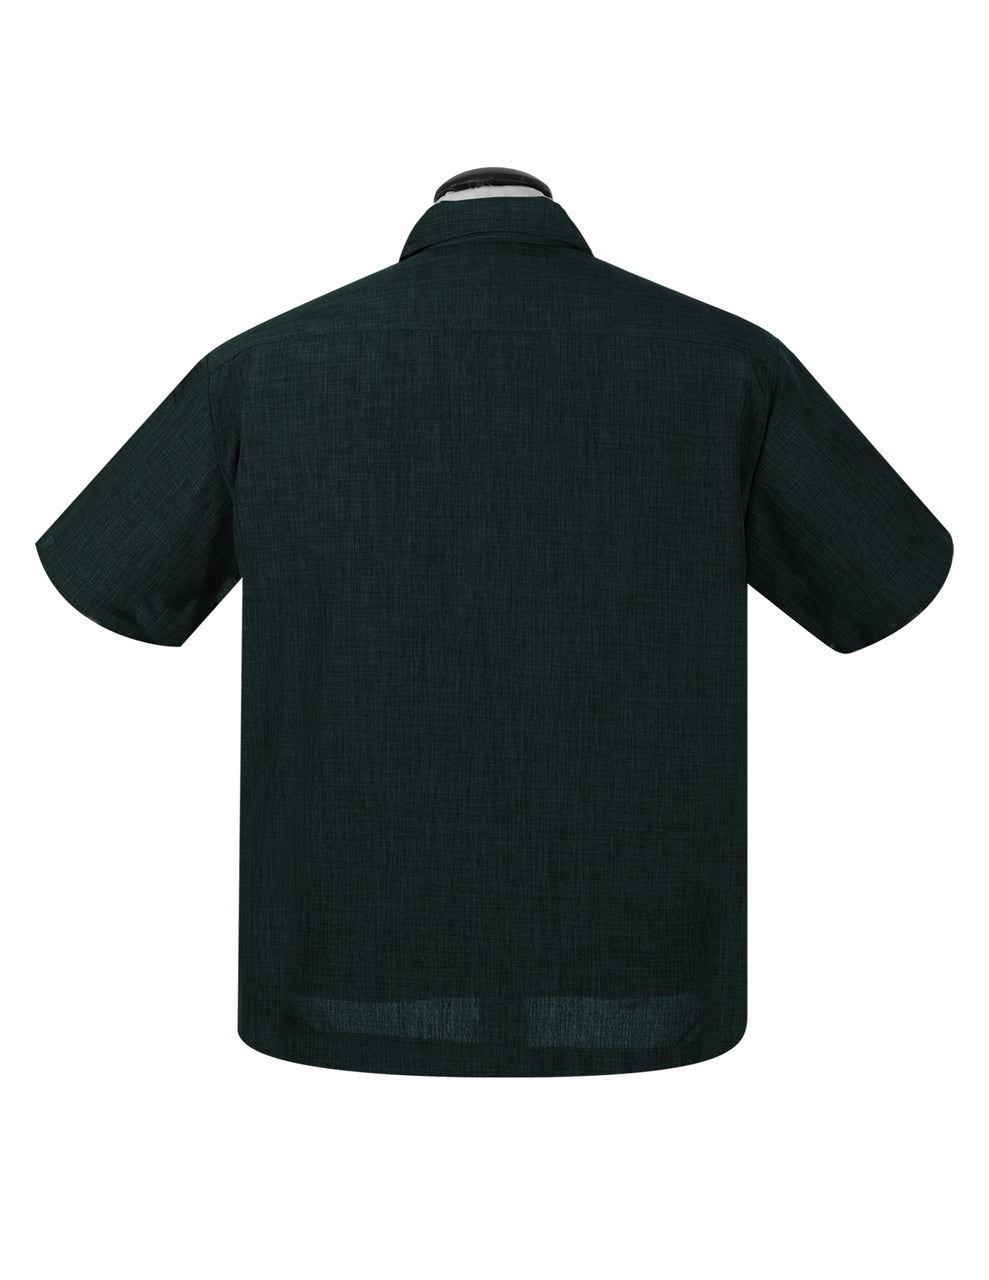 Shop PopCheck Single Panel Bowling Shirt in Teal/Stone Online 